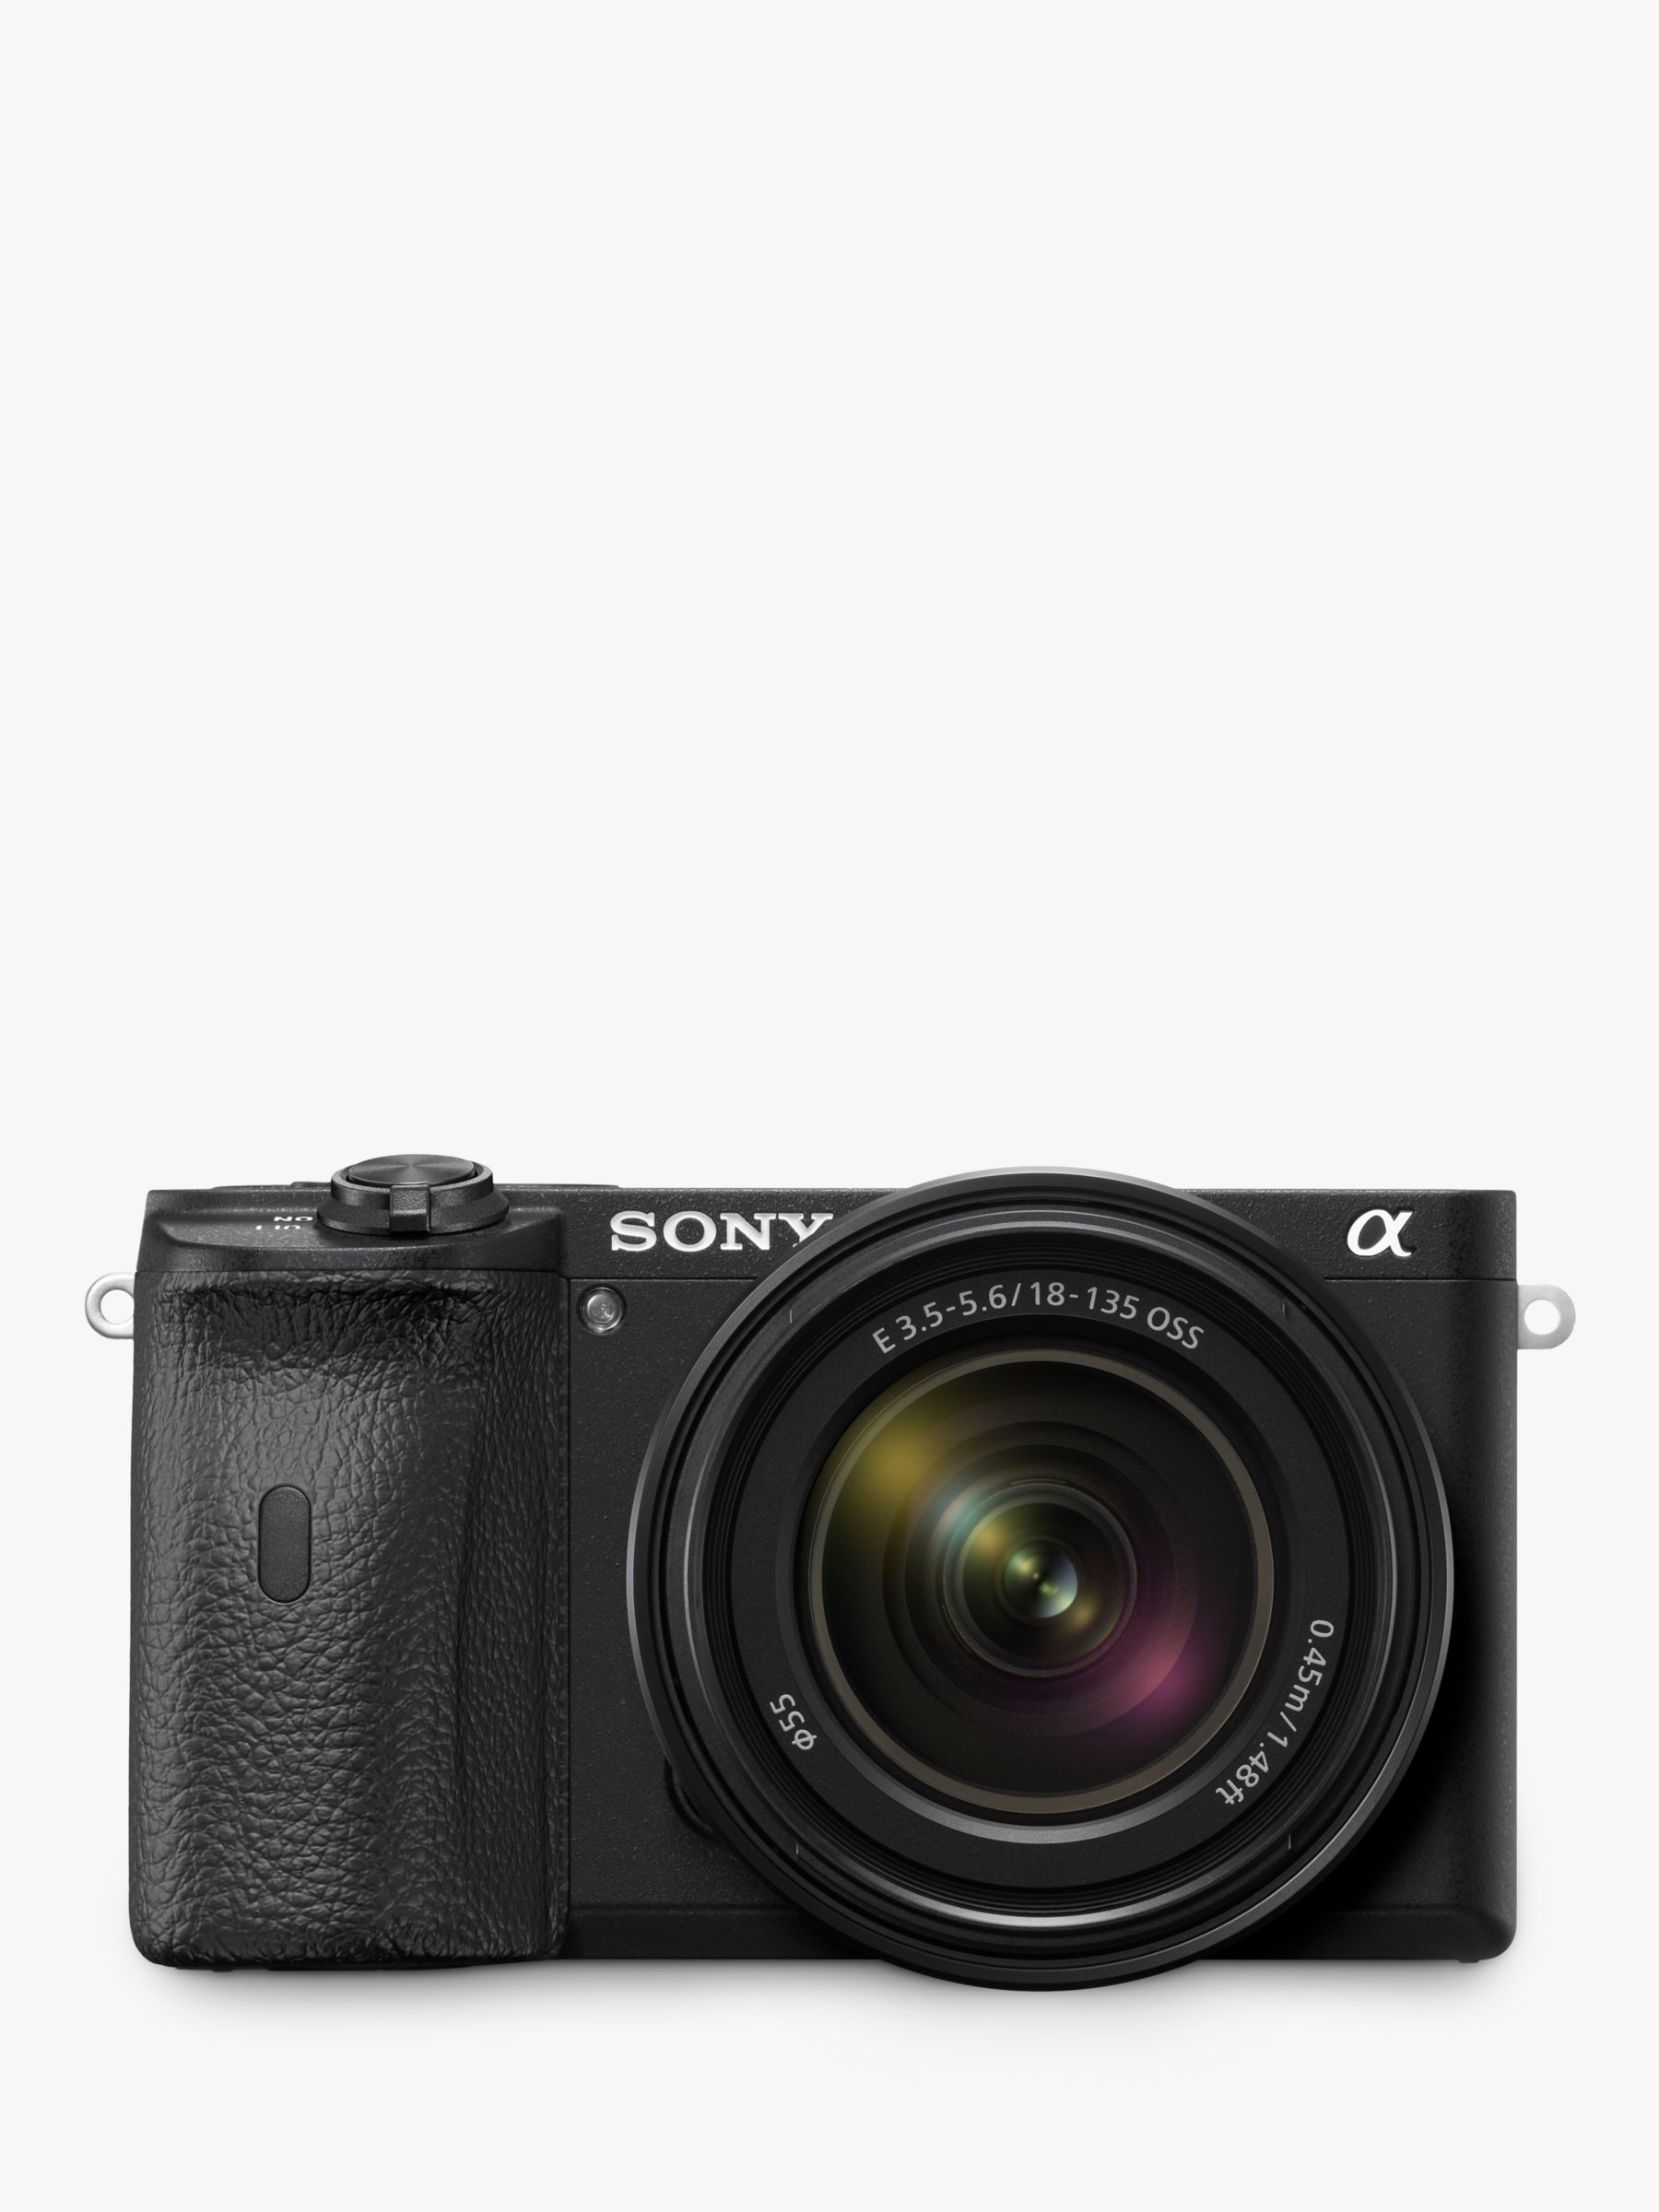 Image of Sony A6600 Compact System Camera with 18135mm OSS Lens 4K Ultra HD 242MP OLED Viewfinder WiFi Bluetooth NFC 3 Tilting Touch Screen Black